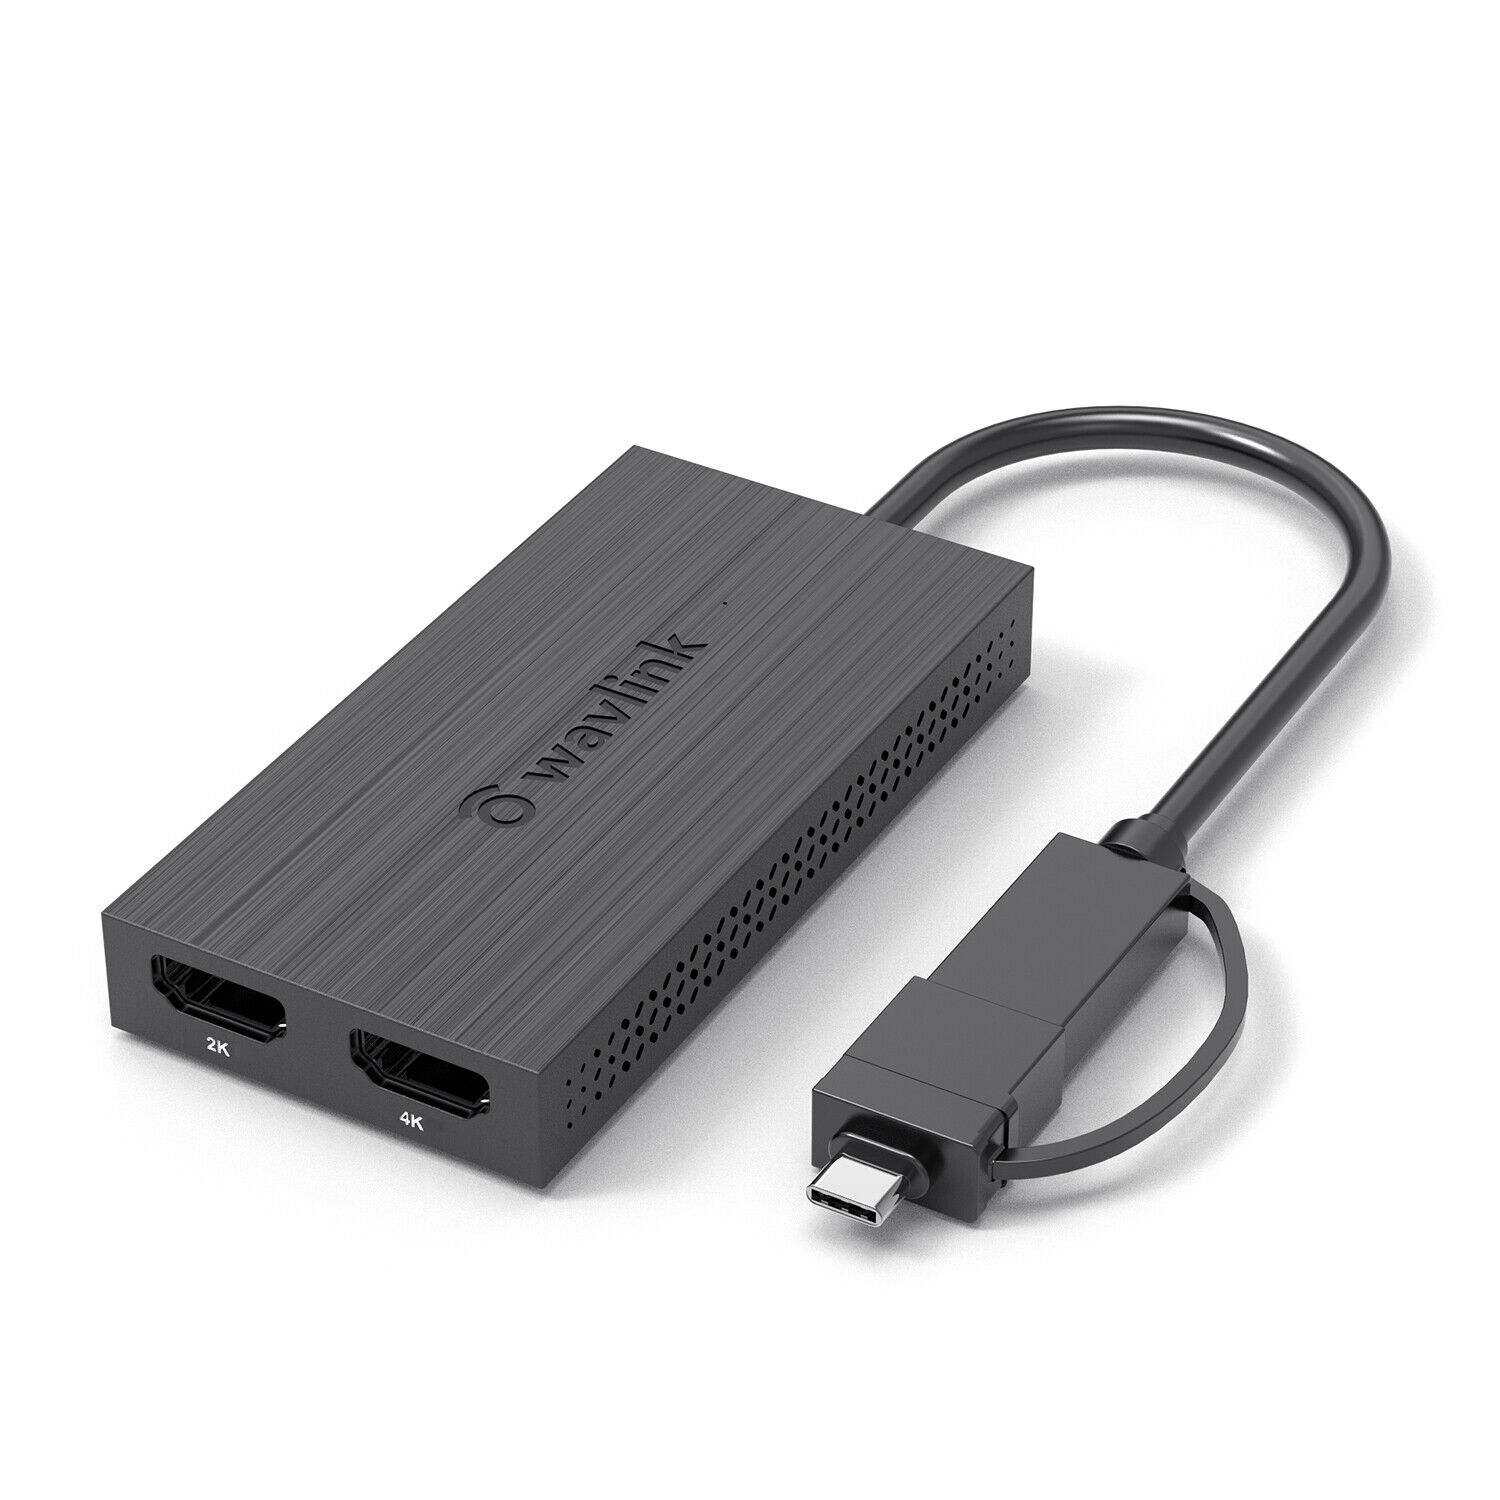 WAVLINK USB 3.0 or USB C to HDMI Adapter for Dual Monitors for Windows Mac os